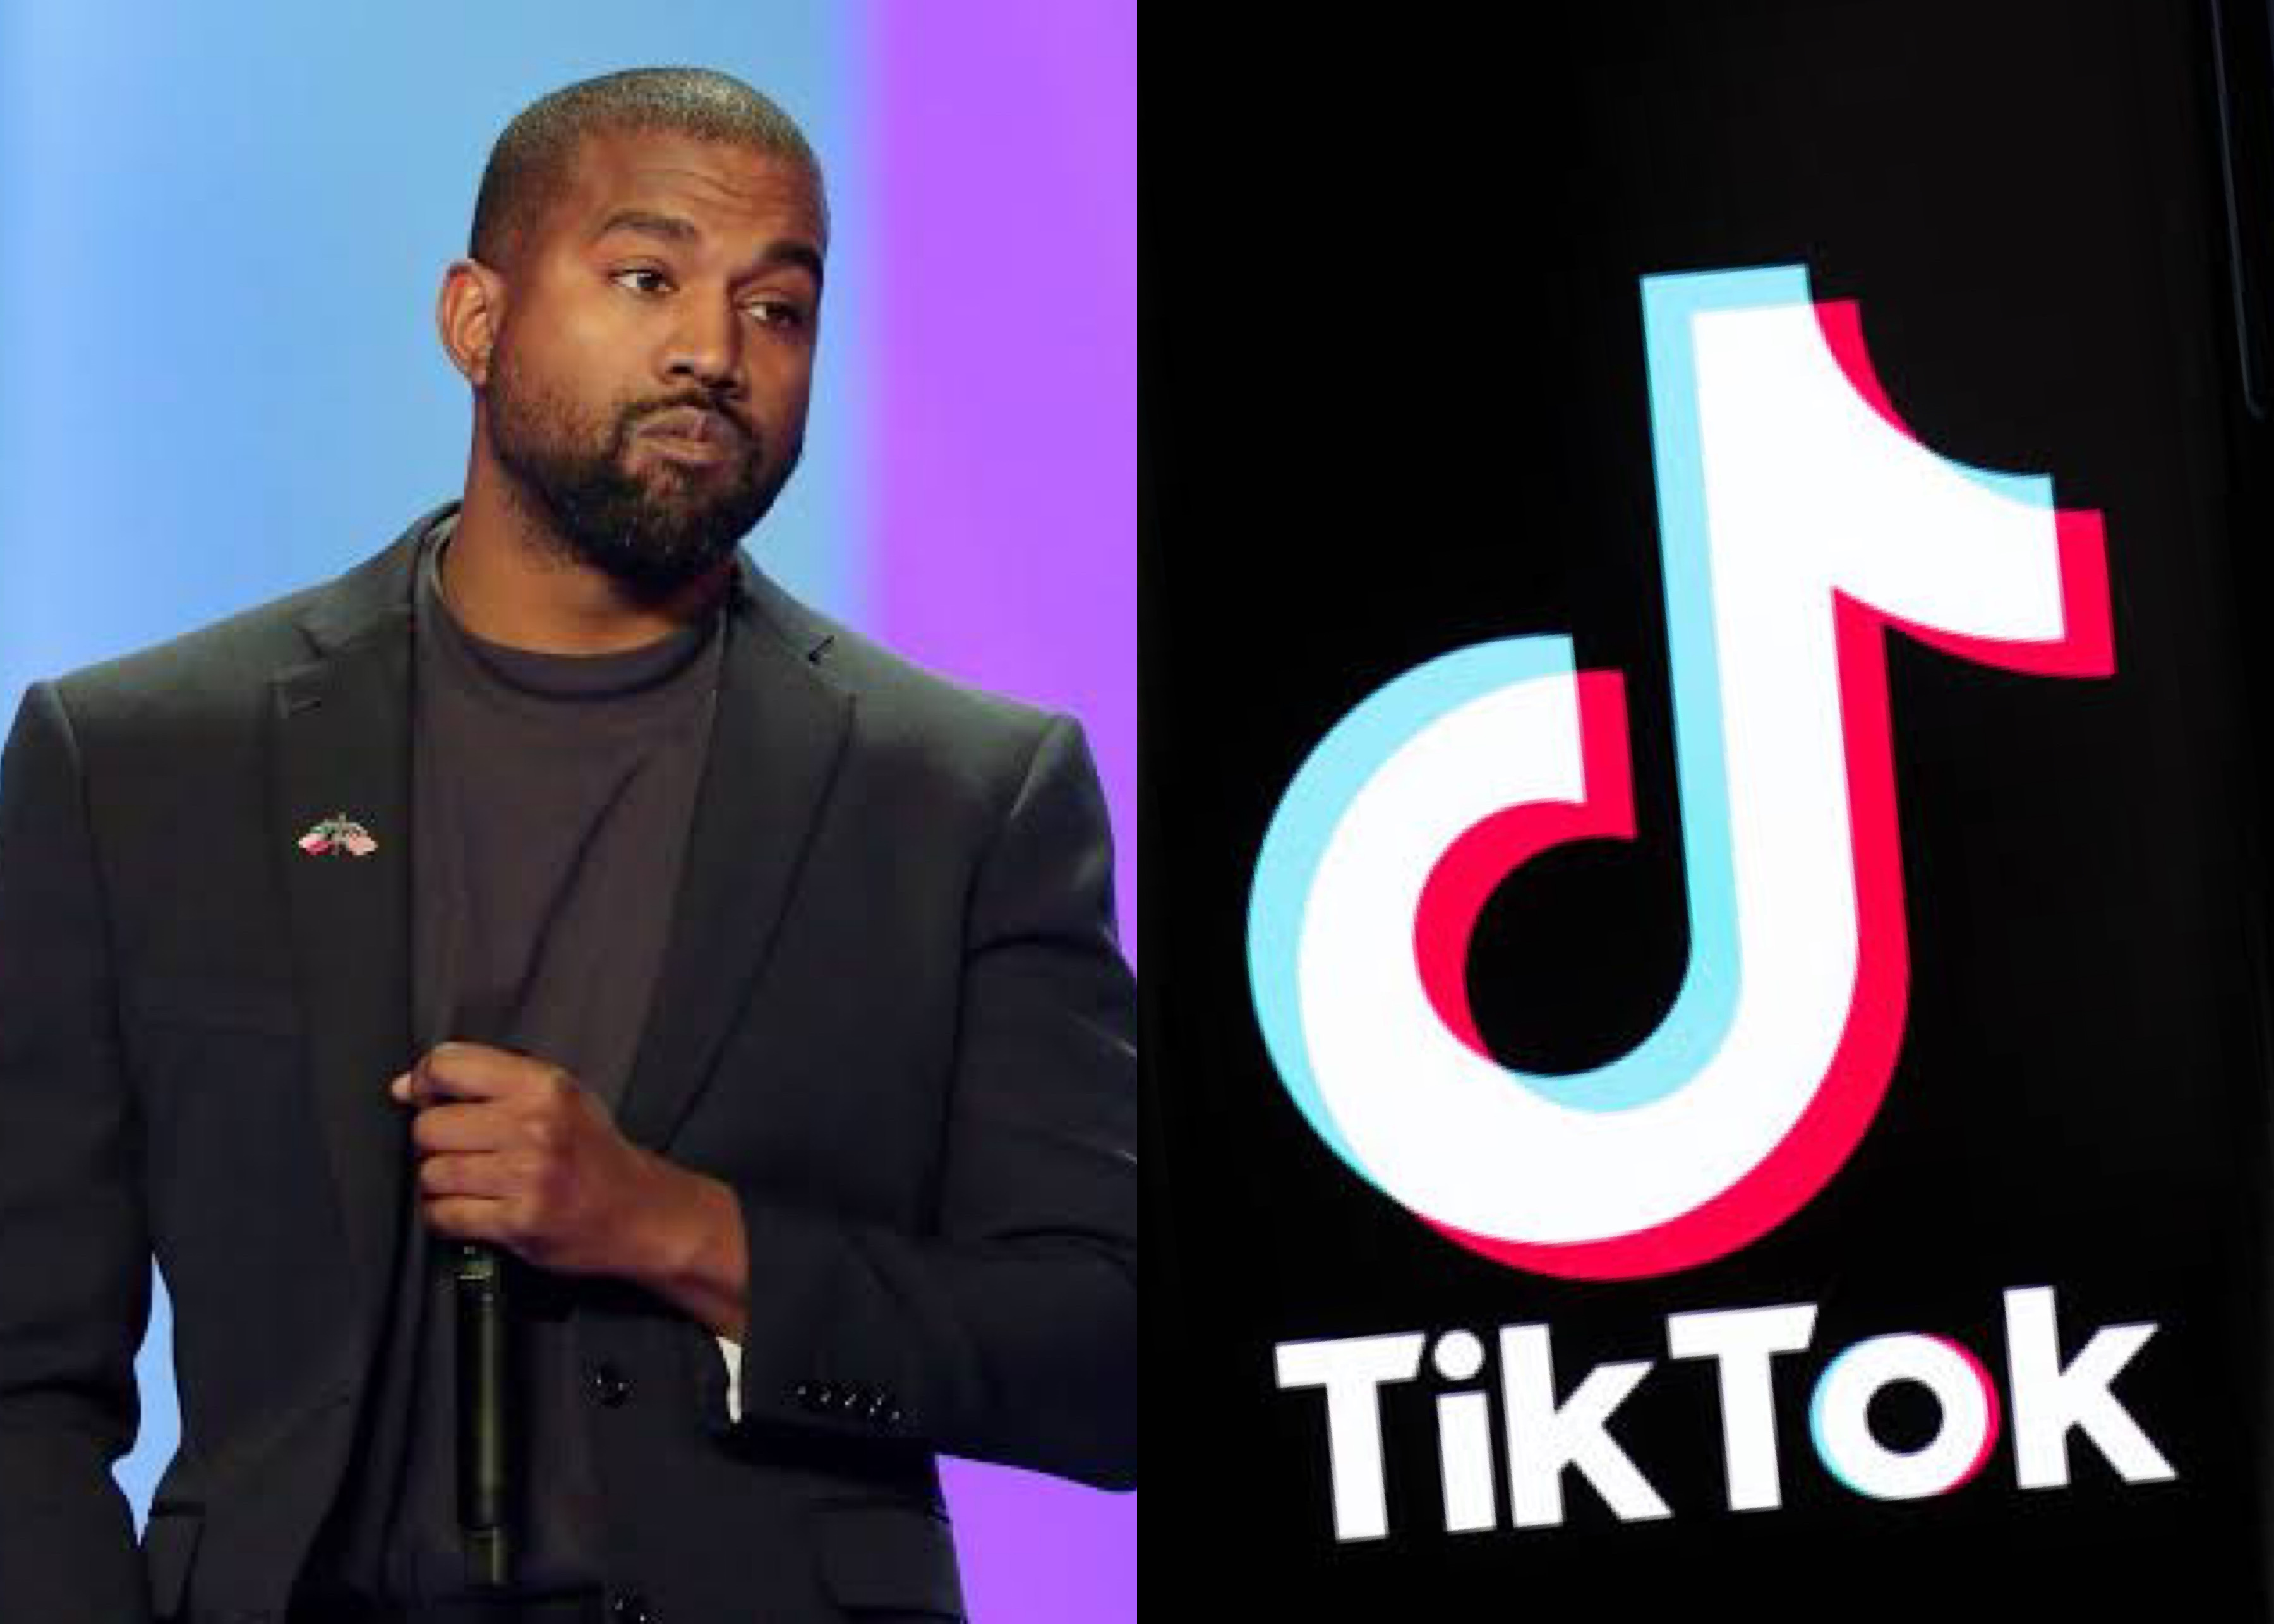 Kanye West To Collaborate With TikTok To Create Christian Version Amid Threat To Ban App In US